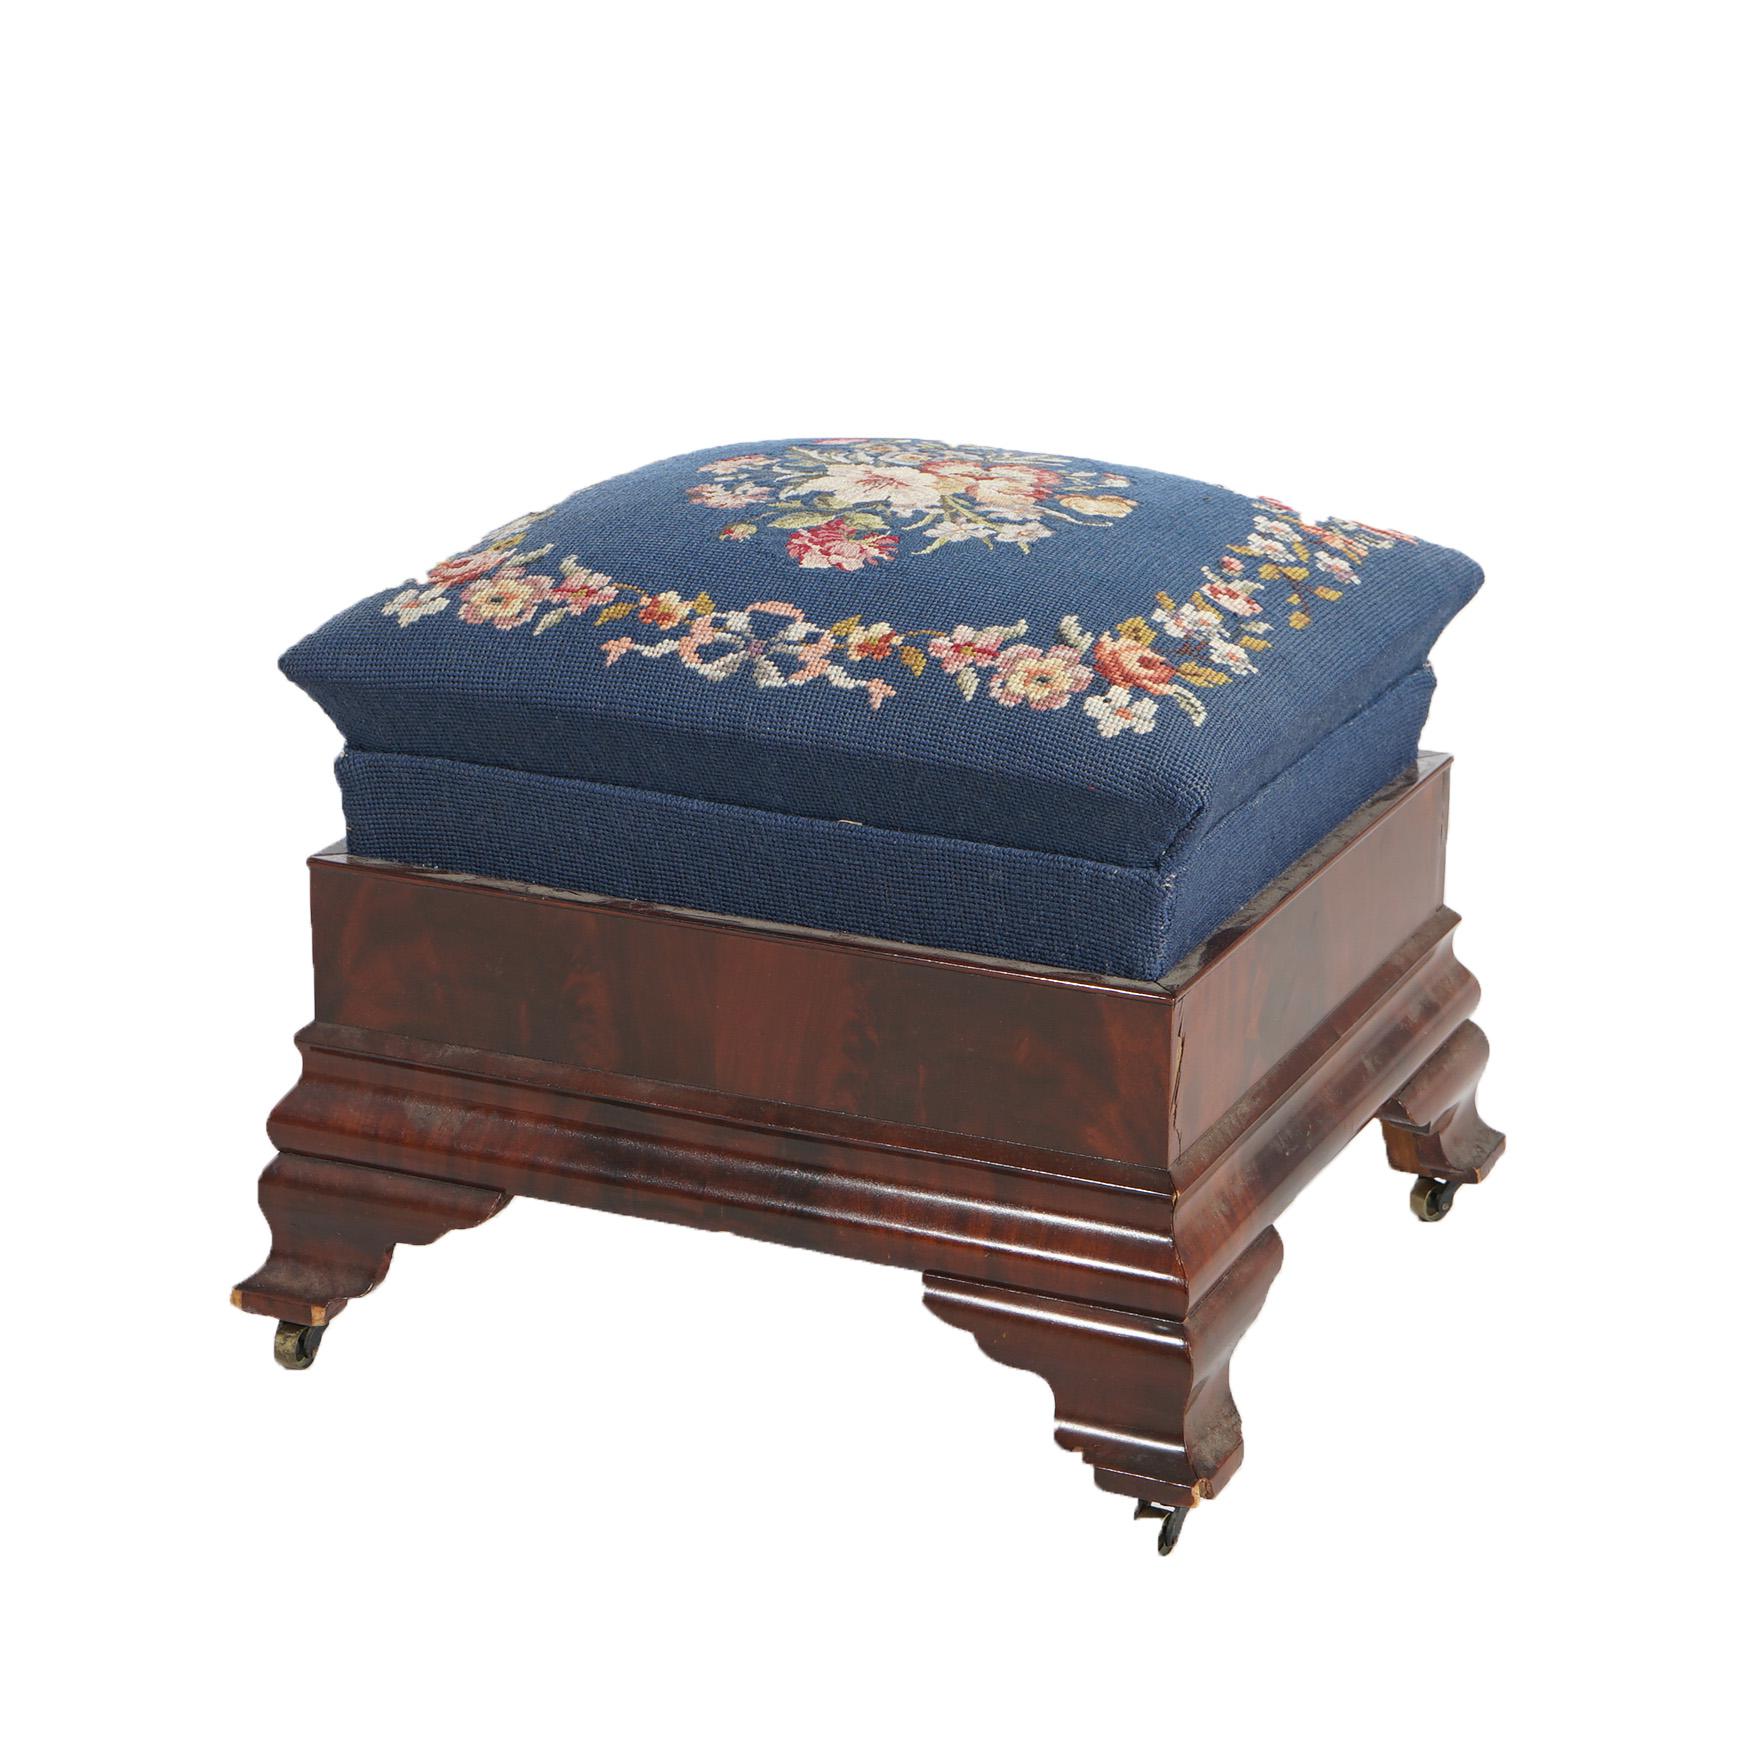 Antique American Empire Classical Greco Flame Mahogany Needlepoint Stool 19thC In Good Condition For Sale In Big Flats, NY